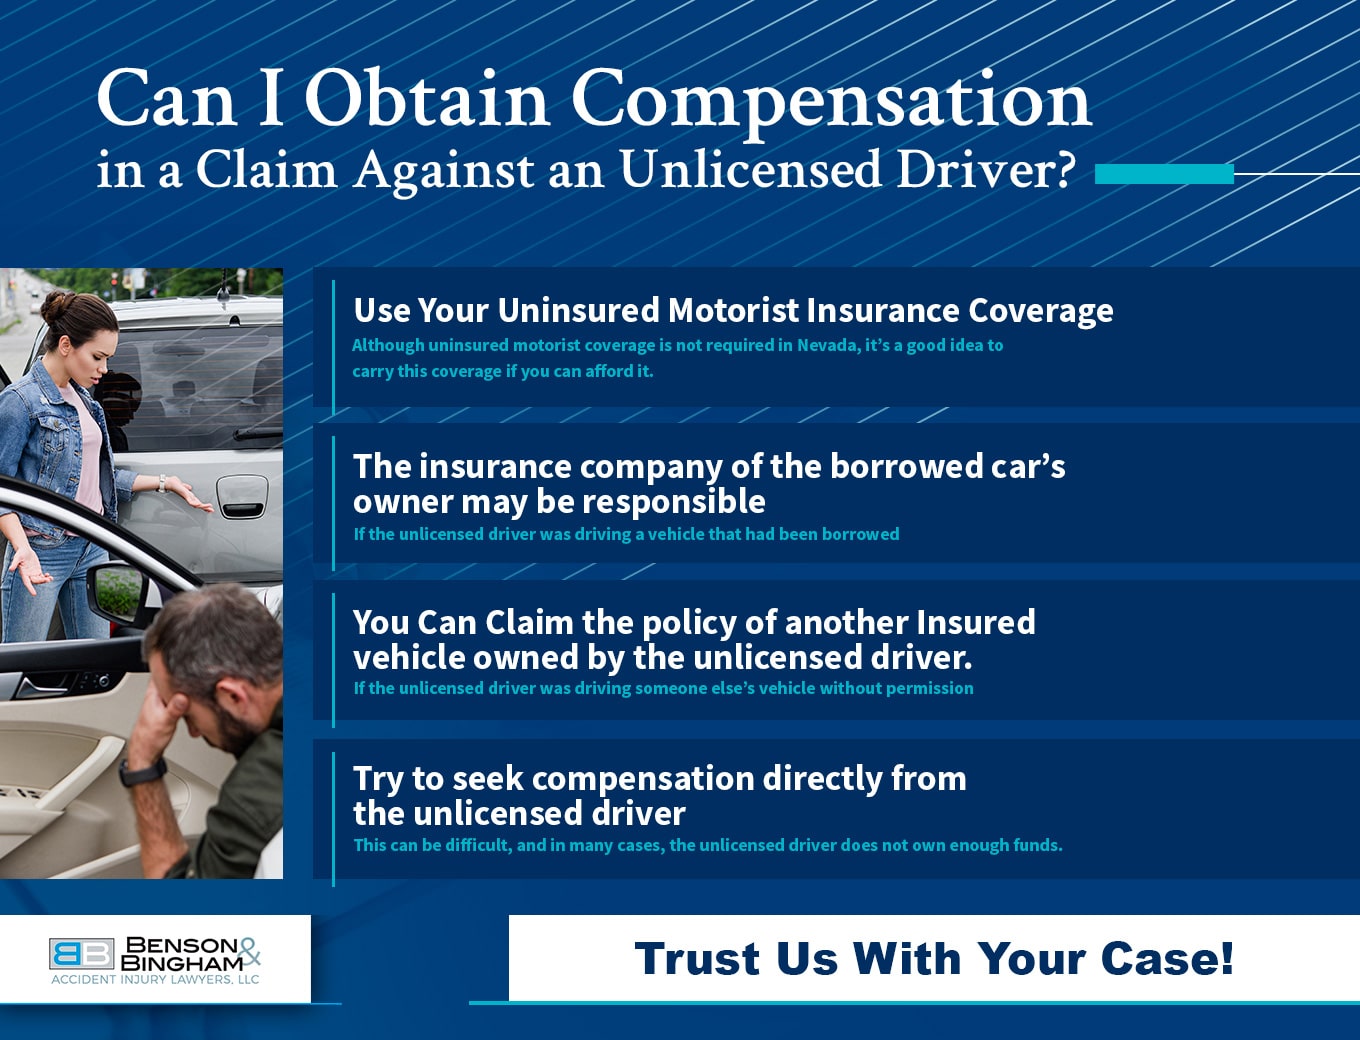 How To File a Claim Against an Unlicensed Driver After a Car Accident